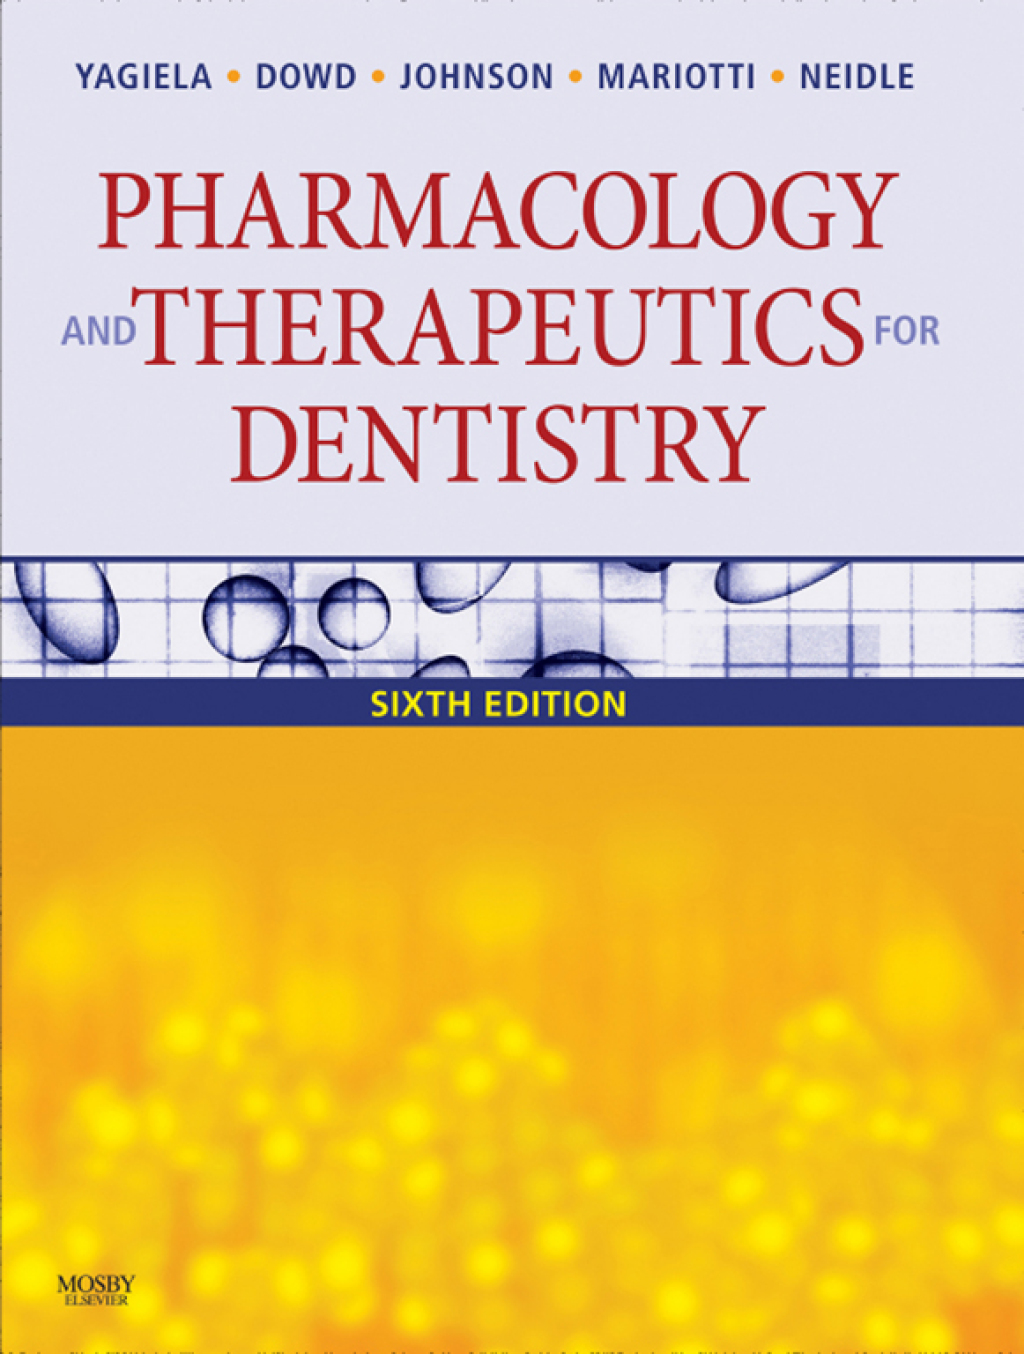 Pharmacology and Therapeutics for Dentistry - 6th Edition (eBook)